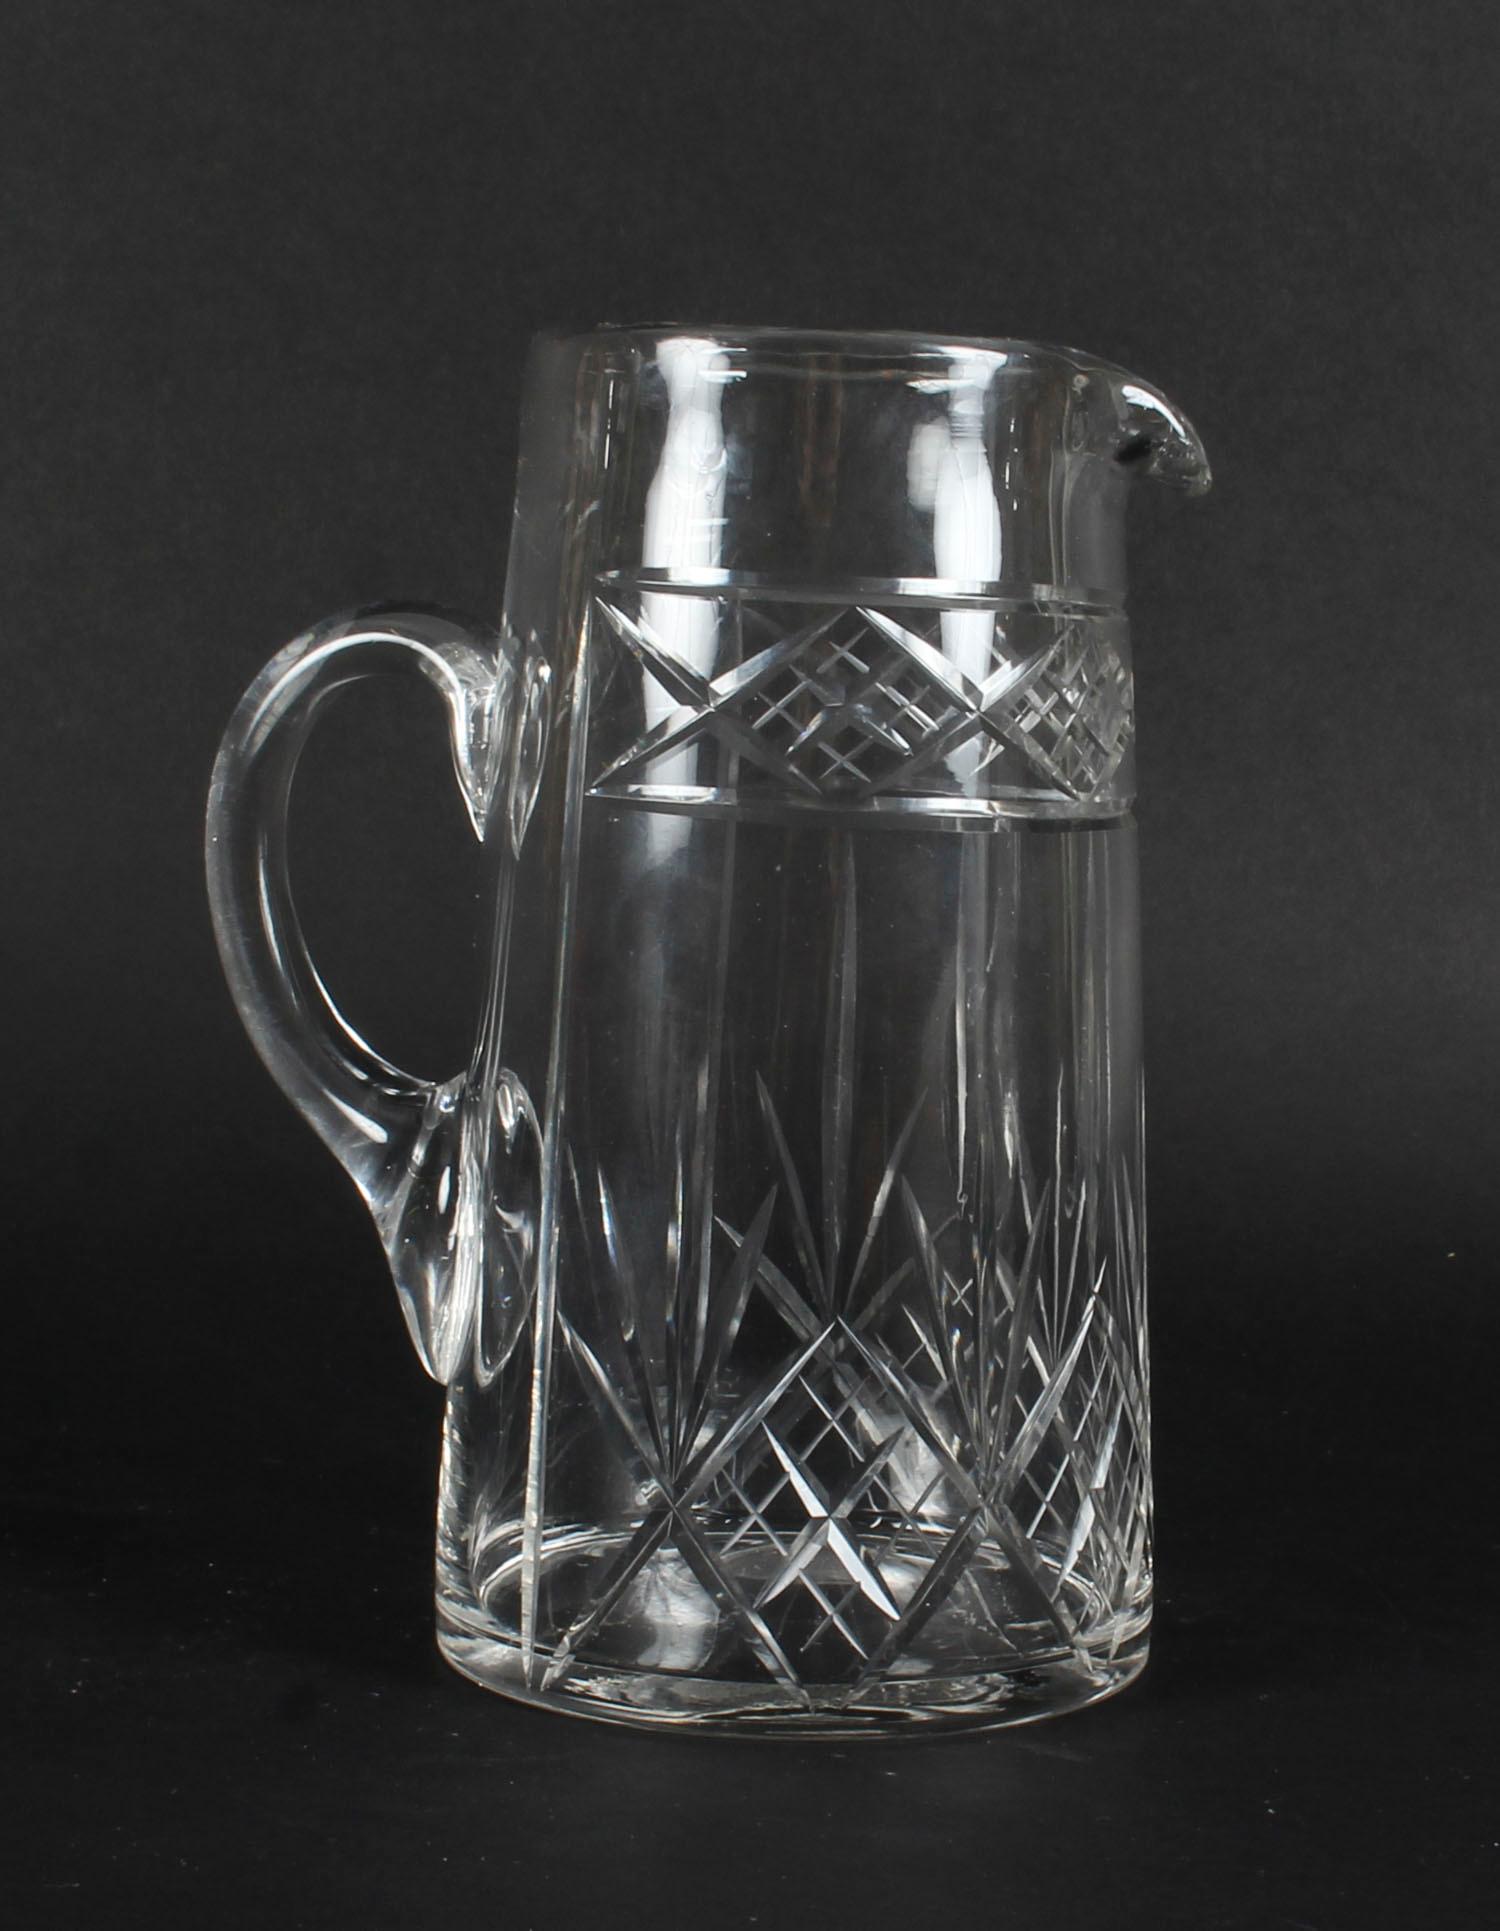 English Antique Edwardian Cut Crystal Cocktail Jug Pitcher, Early 20th Century